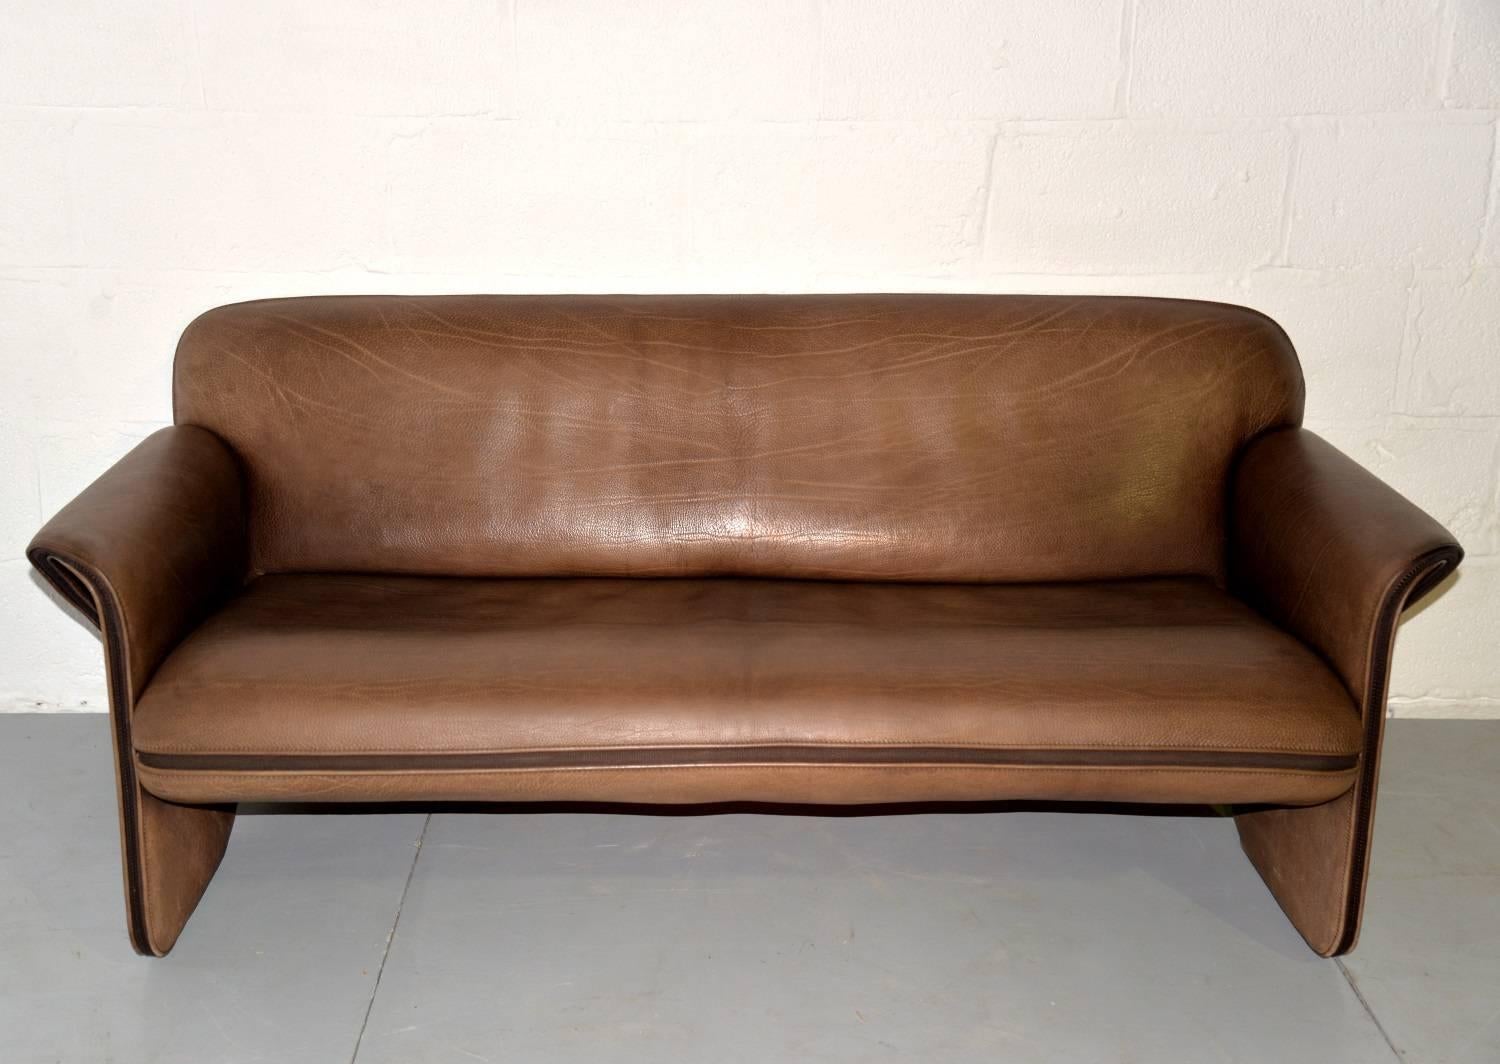 Discounted airfreight for our US and International customers ( from 2 weeks door to door)

The Cambridge Chair Company brings to you an ultra rare vintage De Sede DS 125 sofa designed by Gerd Lange in 1978. These sculptural pieces are upholstered in